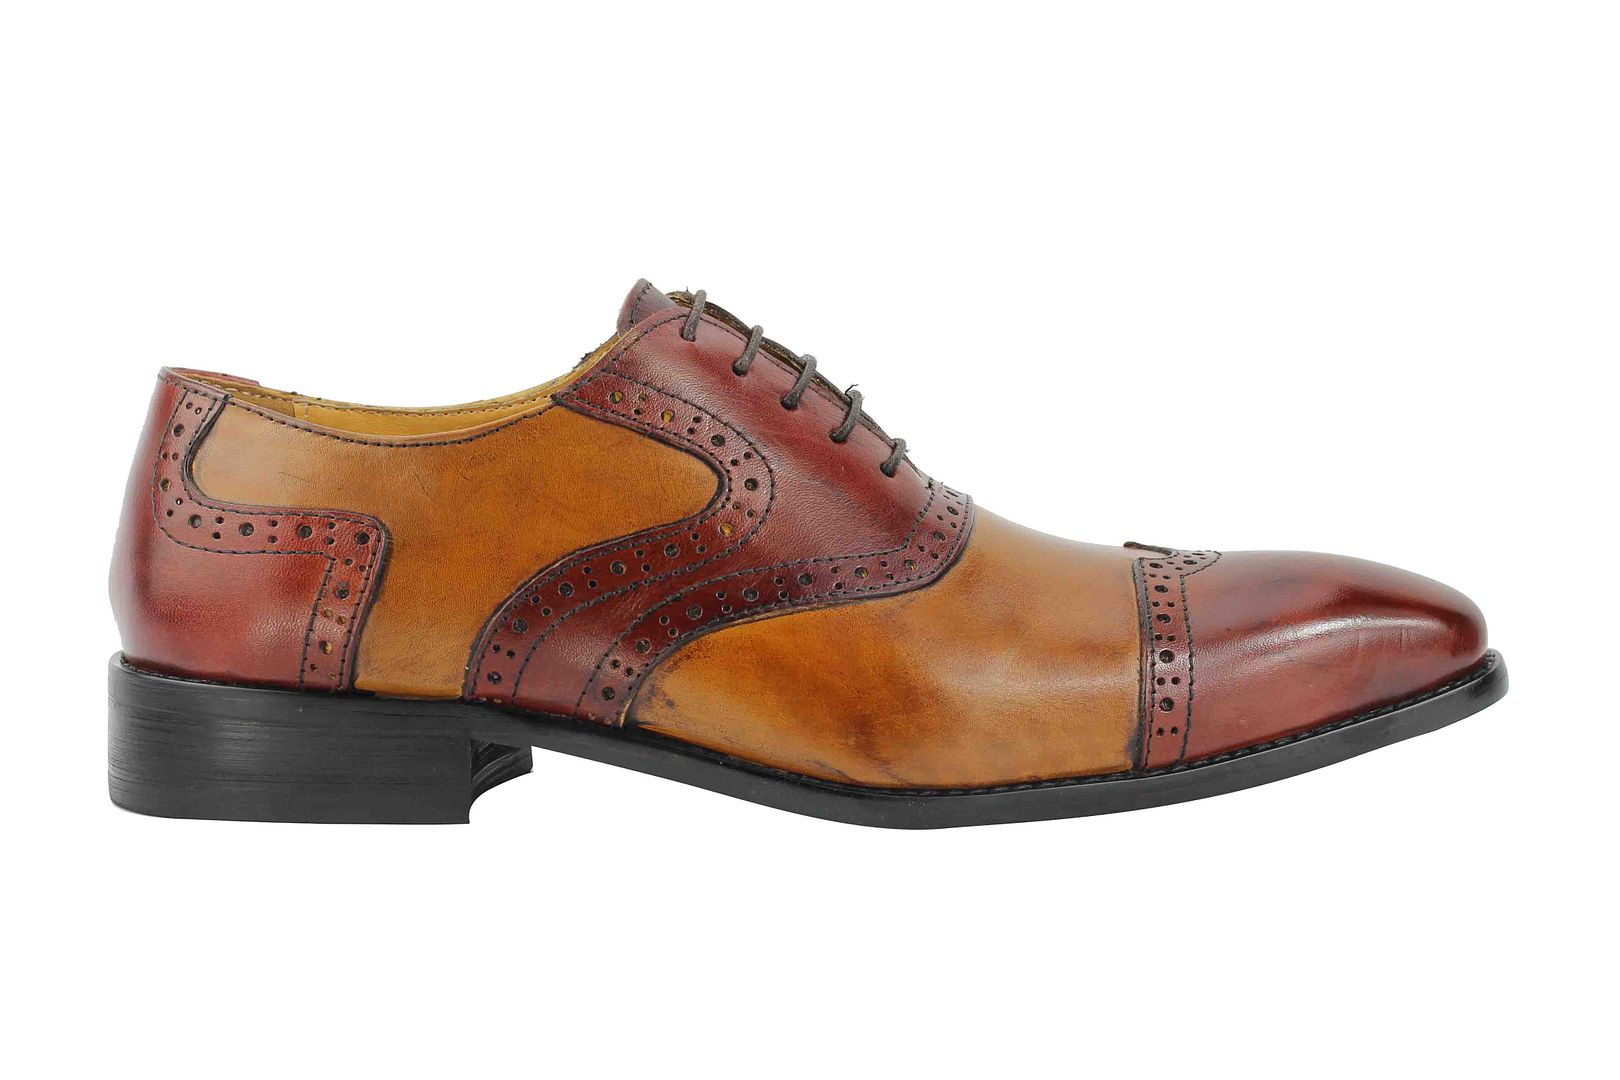 New Men 2 Tone Maroon Tan Real Leather Vintage Smart Casual Brogue Lace ...